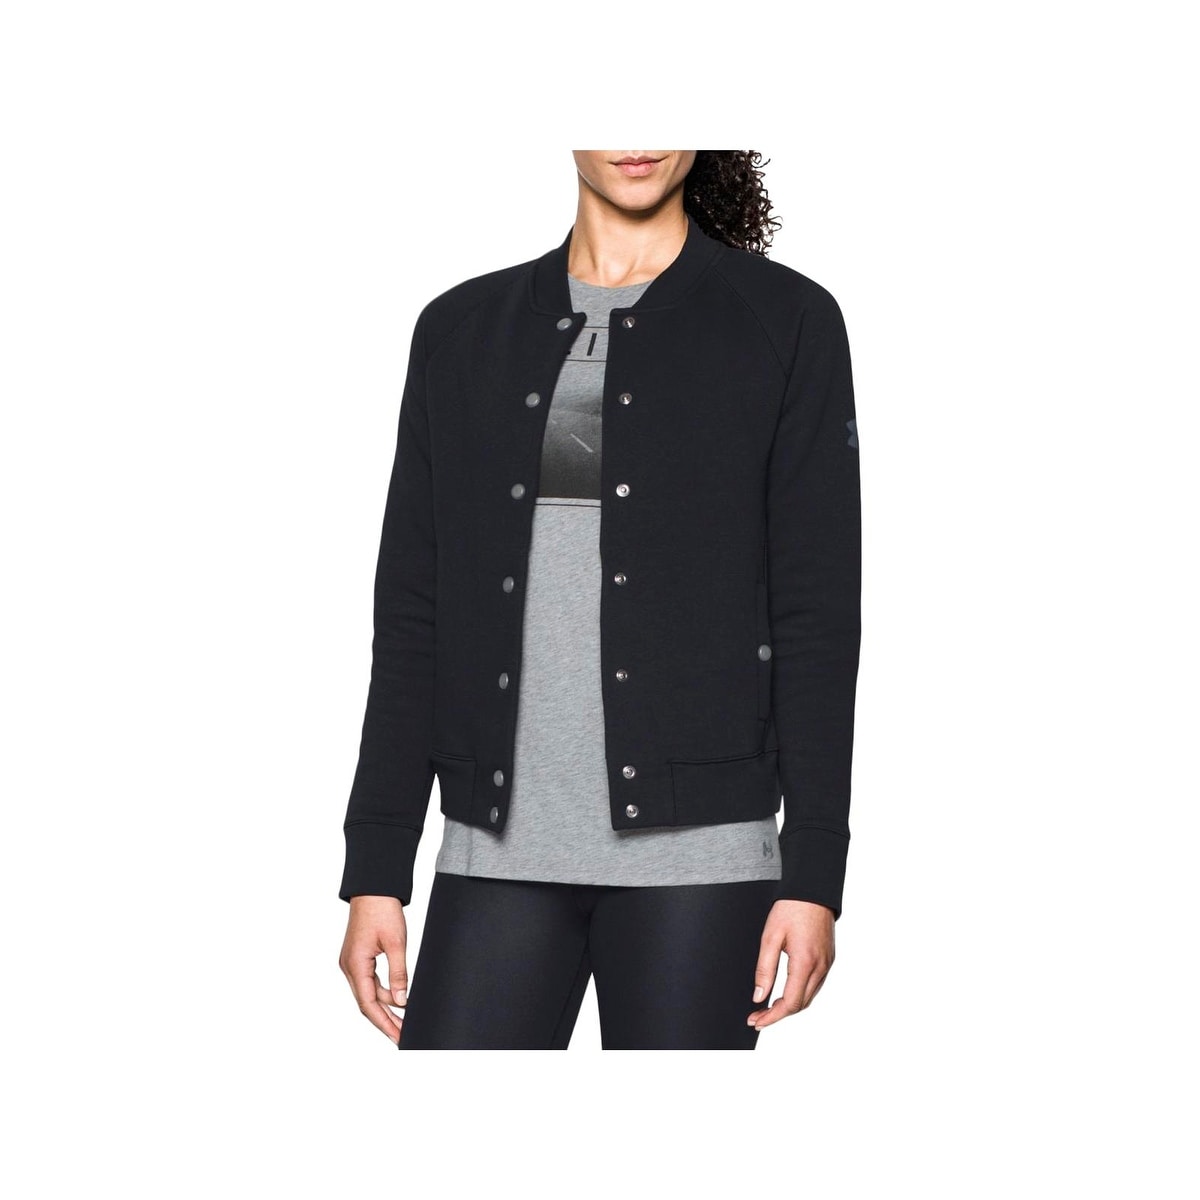 under armour loose jacket